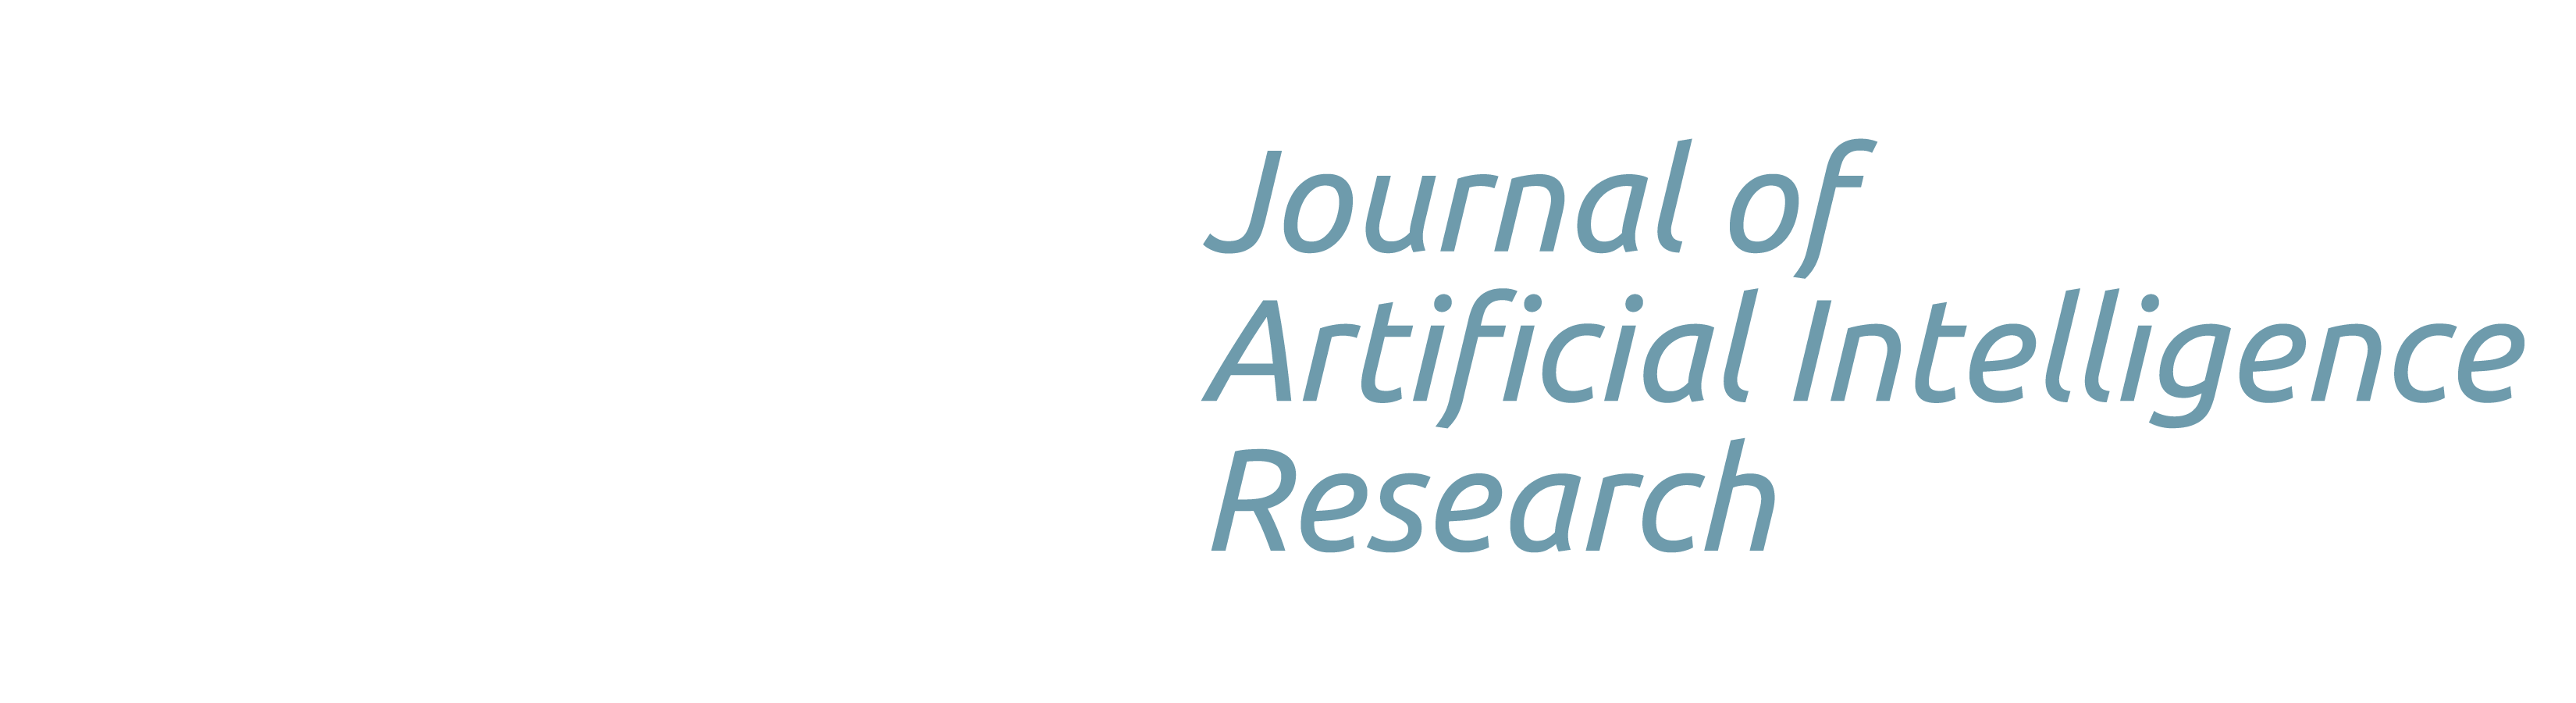 journal of artificial intelligence research